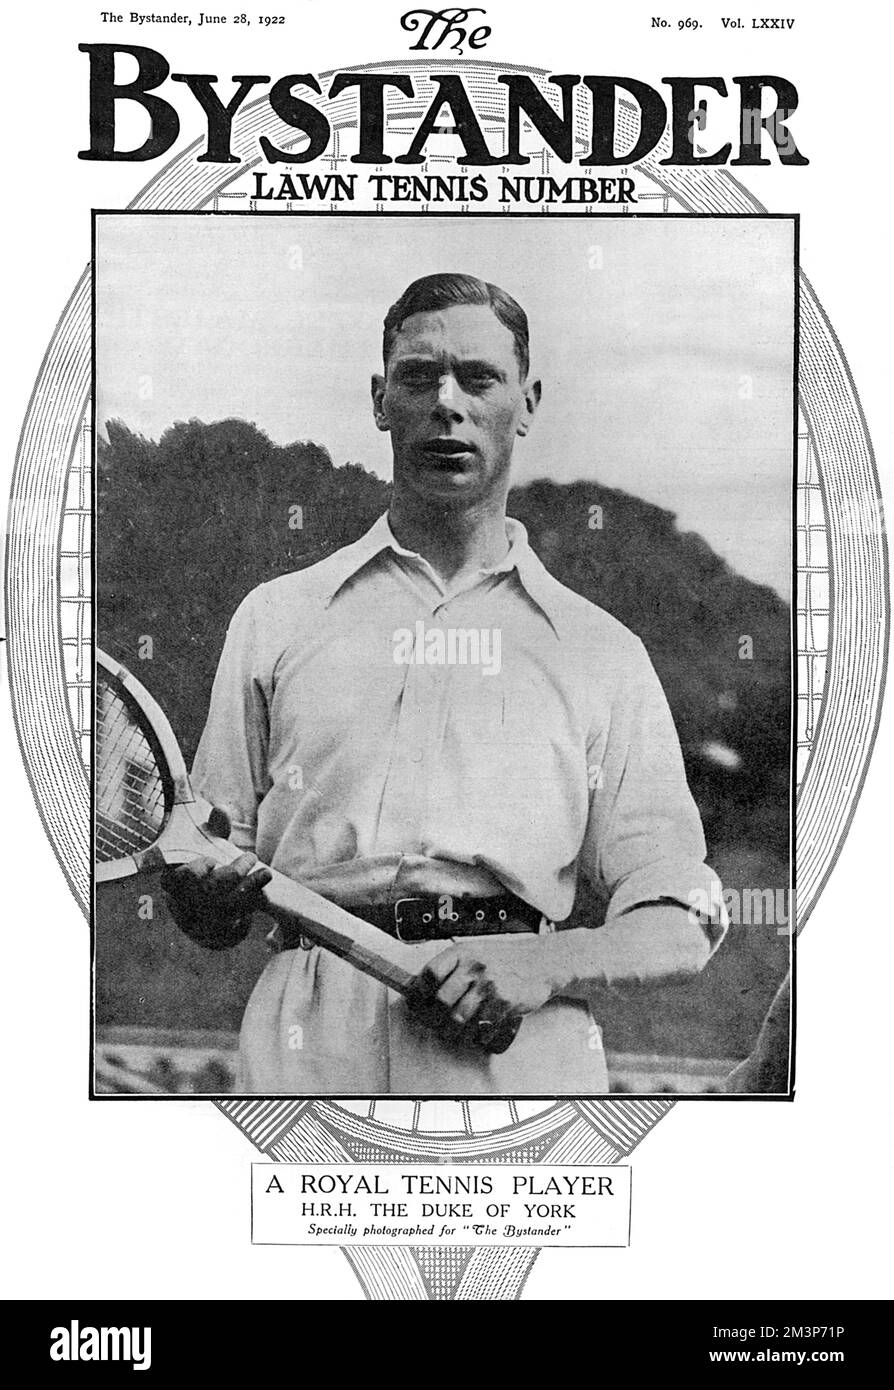 Front cover of The Bystander magazine featuring Prince Albert, Duke of York -the future King George VI - as a tennis player.  The Duke was a keen player and partnered Sir Louis Greig, entering the men's doubles competition at Wimbledon in 1926.  The pair were knocked out in the first round by Arthur Gore and Herbert Roper Barrett.     Date: 1922 Stock Photo